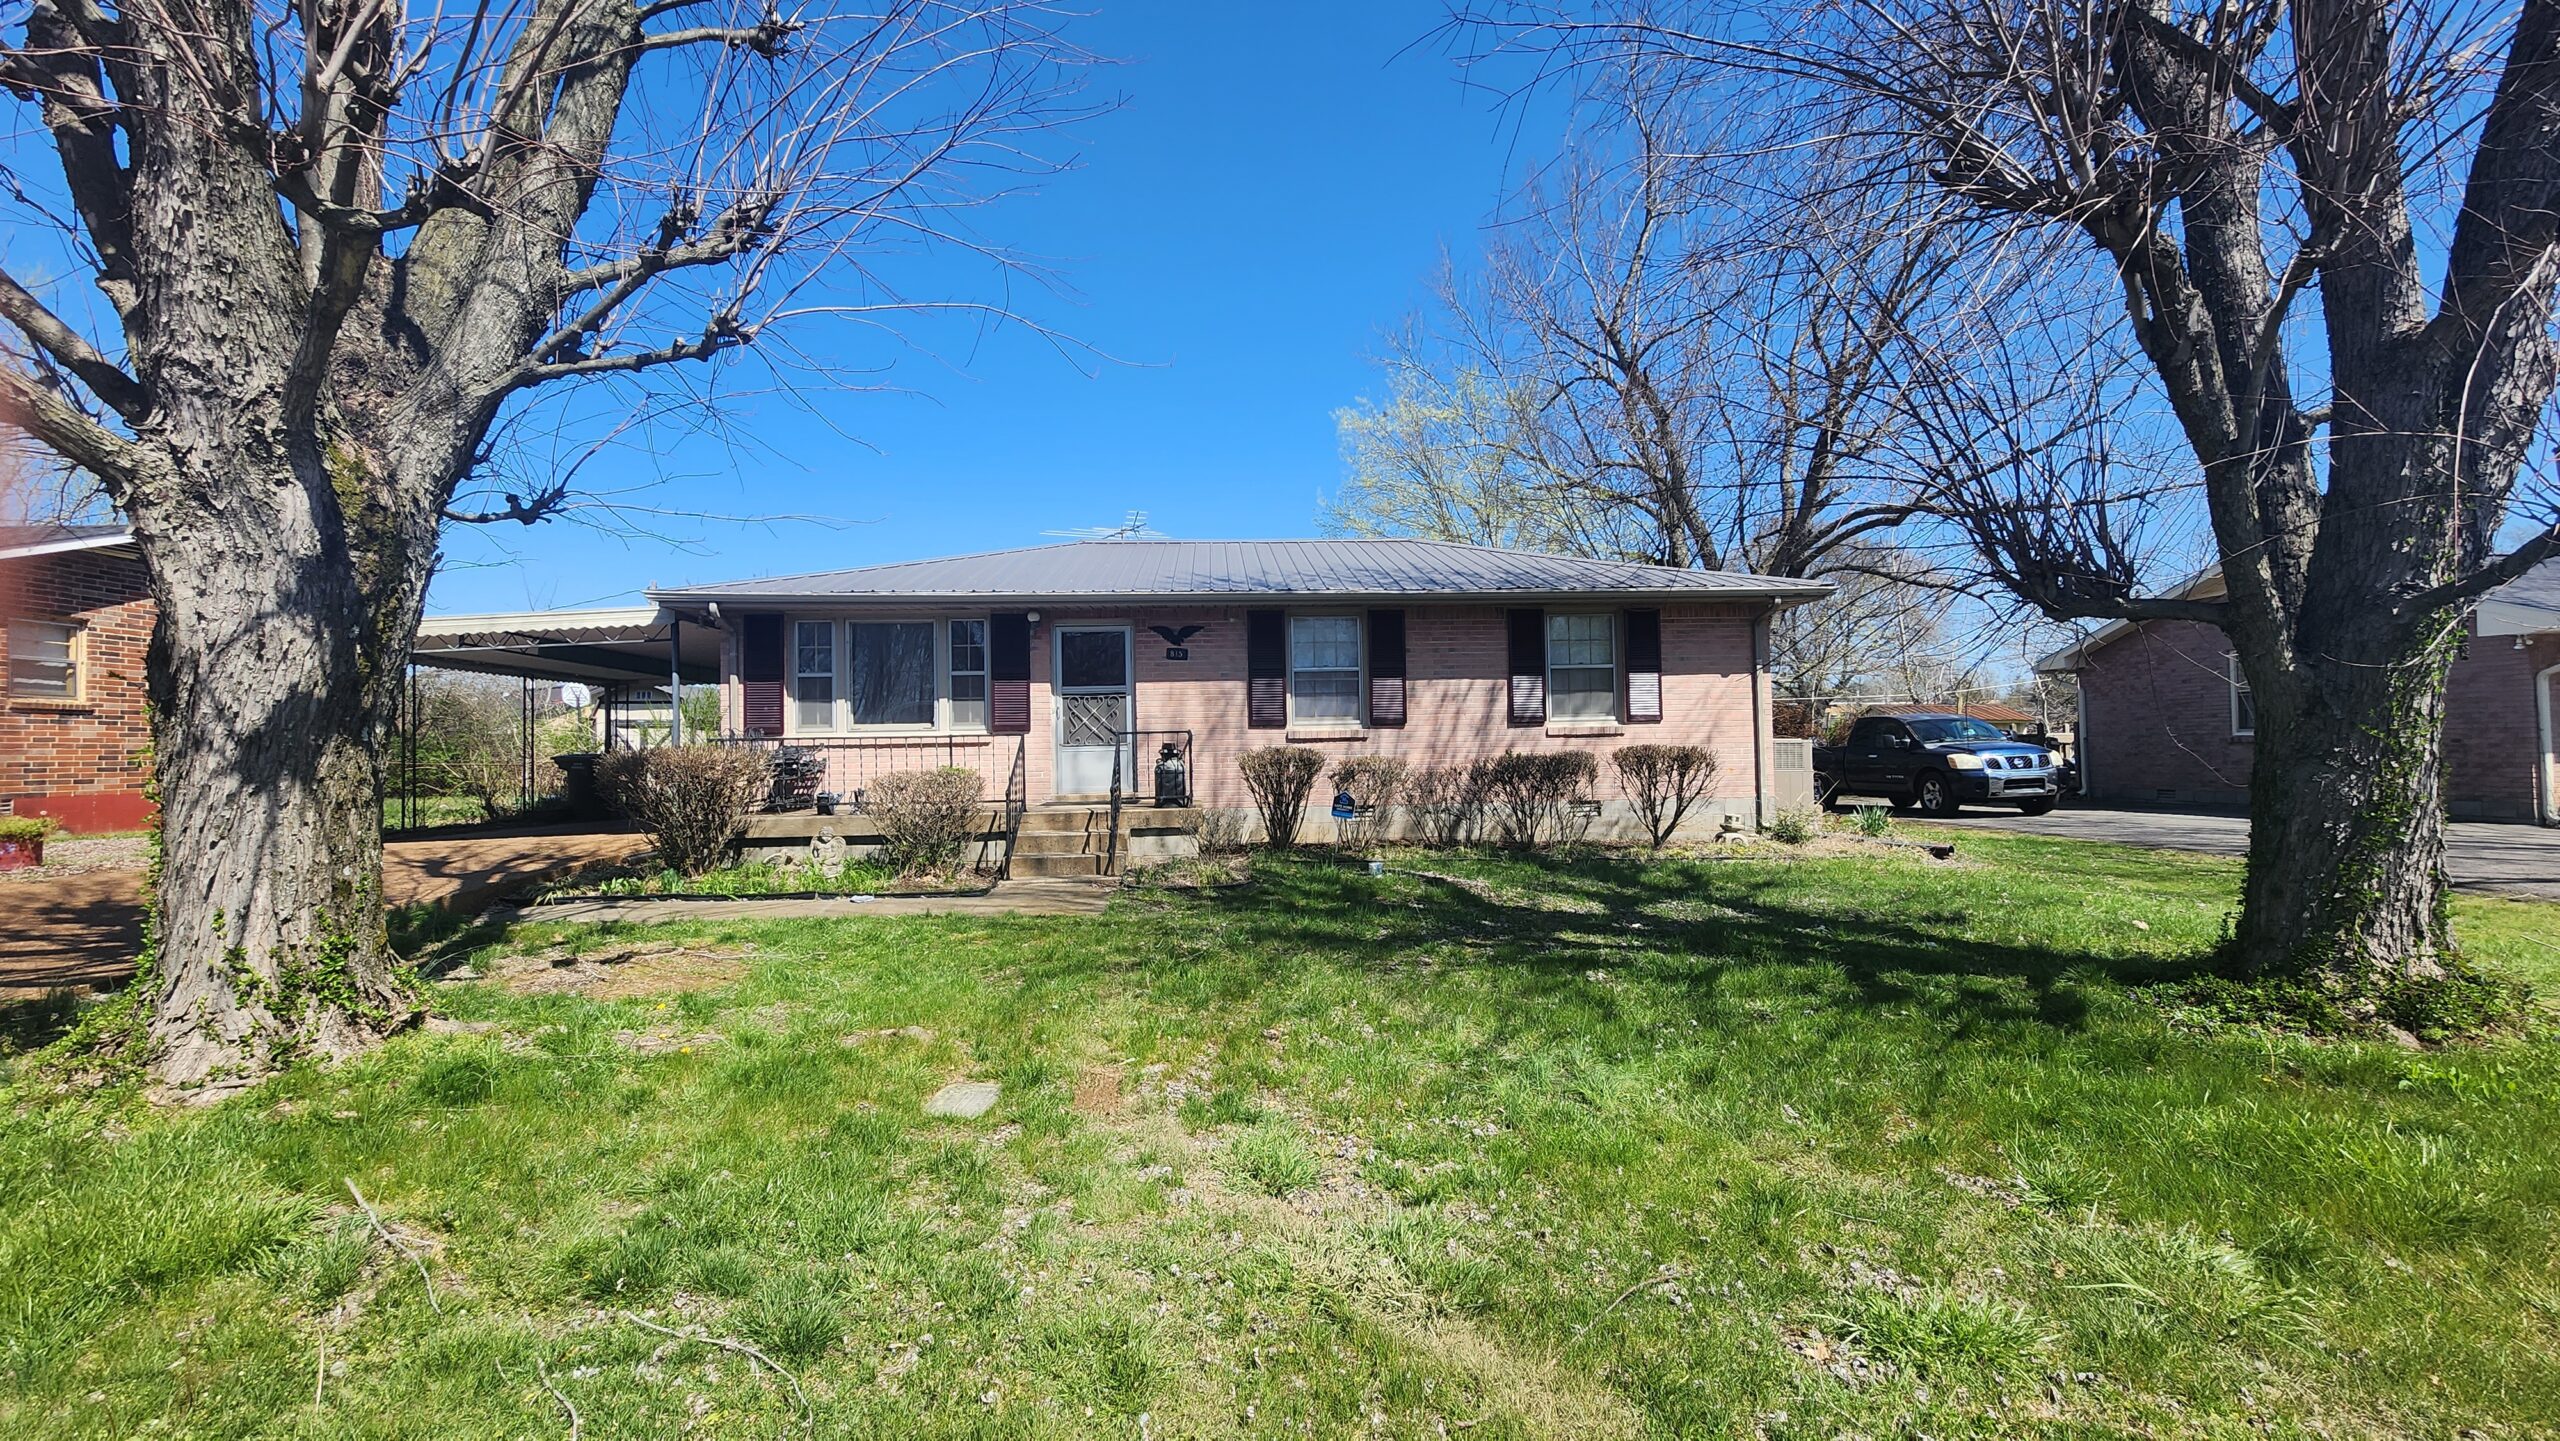 Investment Opportunity! Auction – 815 MS Couts Blvd, Springfield, TN 37172 – April 29th @ 10AM